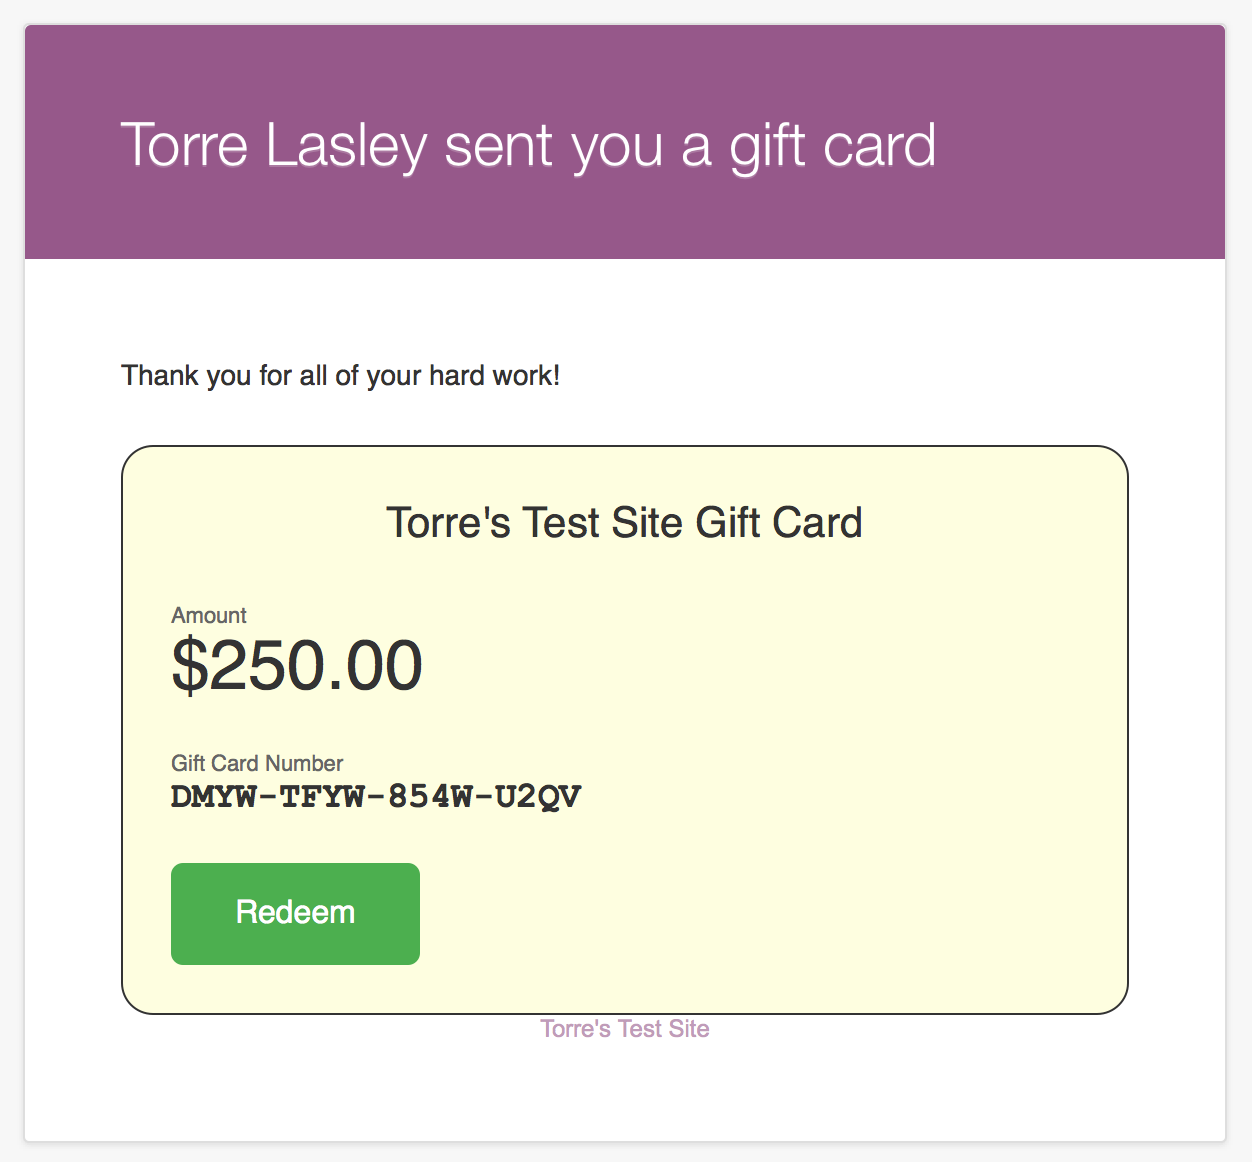 WooCommerce email template system for beautiful emails. Click the link directly in the email to add the gift card to the cart automatically!